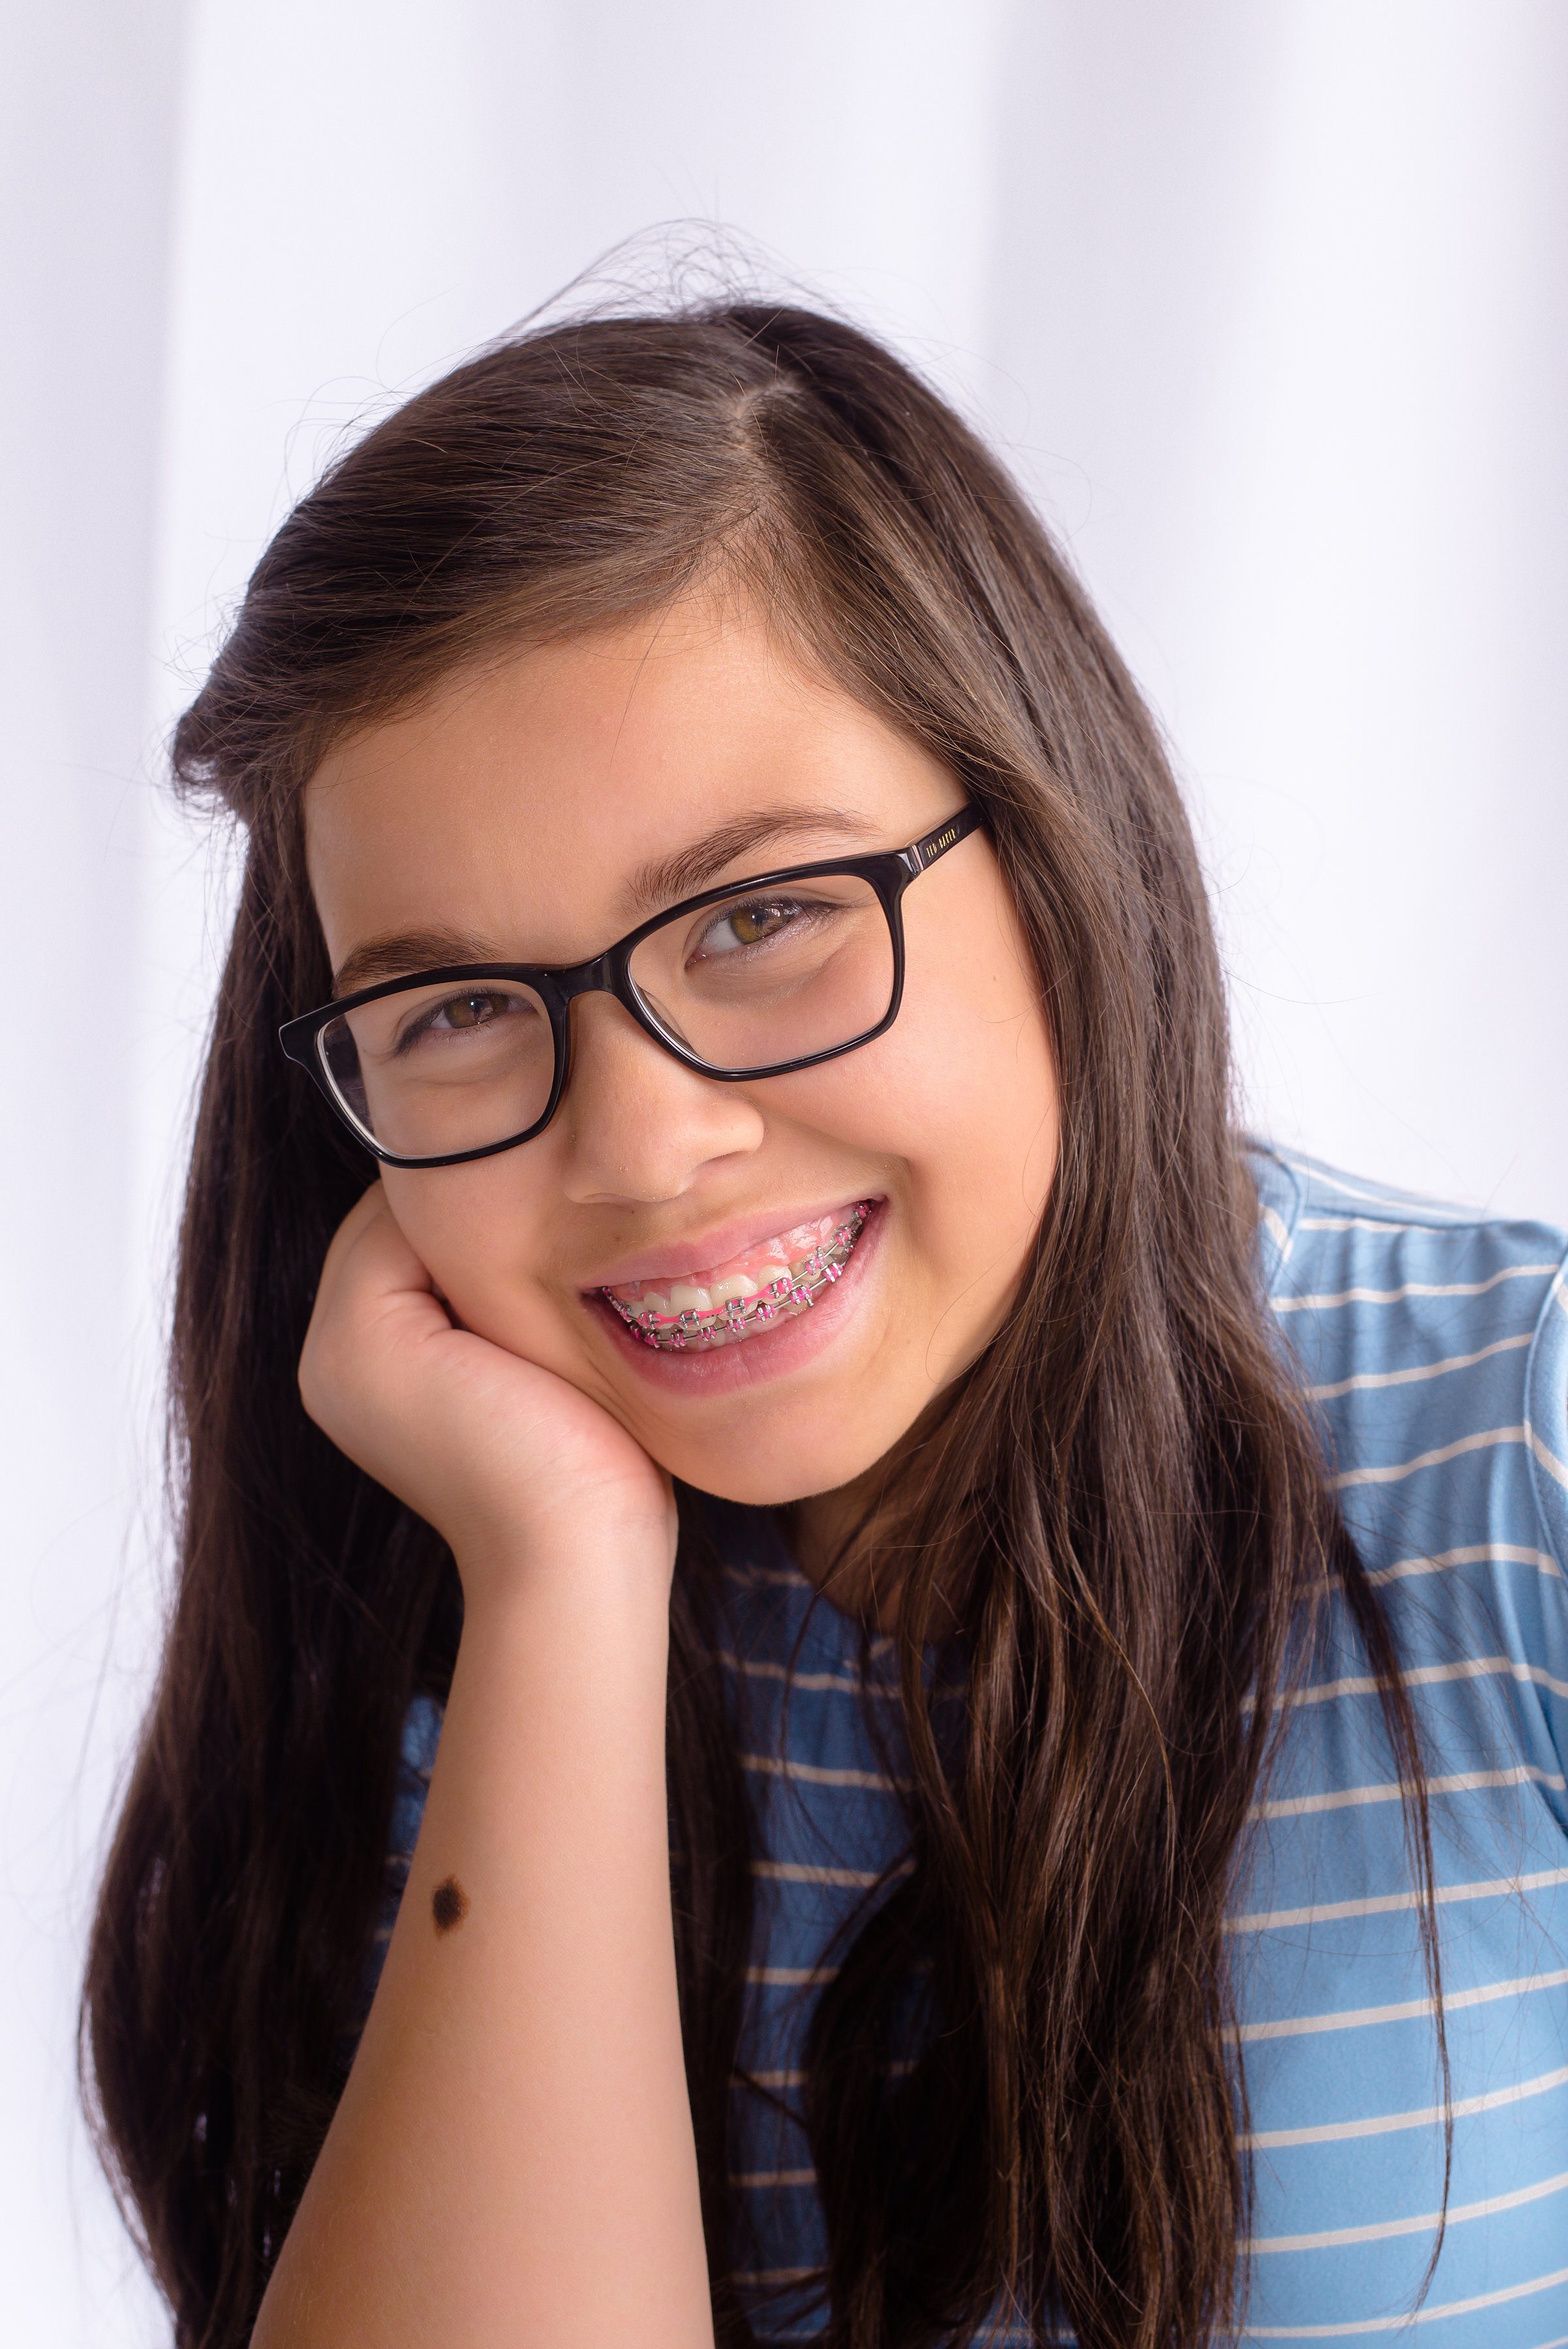 Rubber Band Wear - Orthodontist Vancouver WA